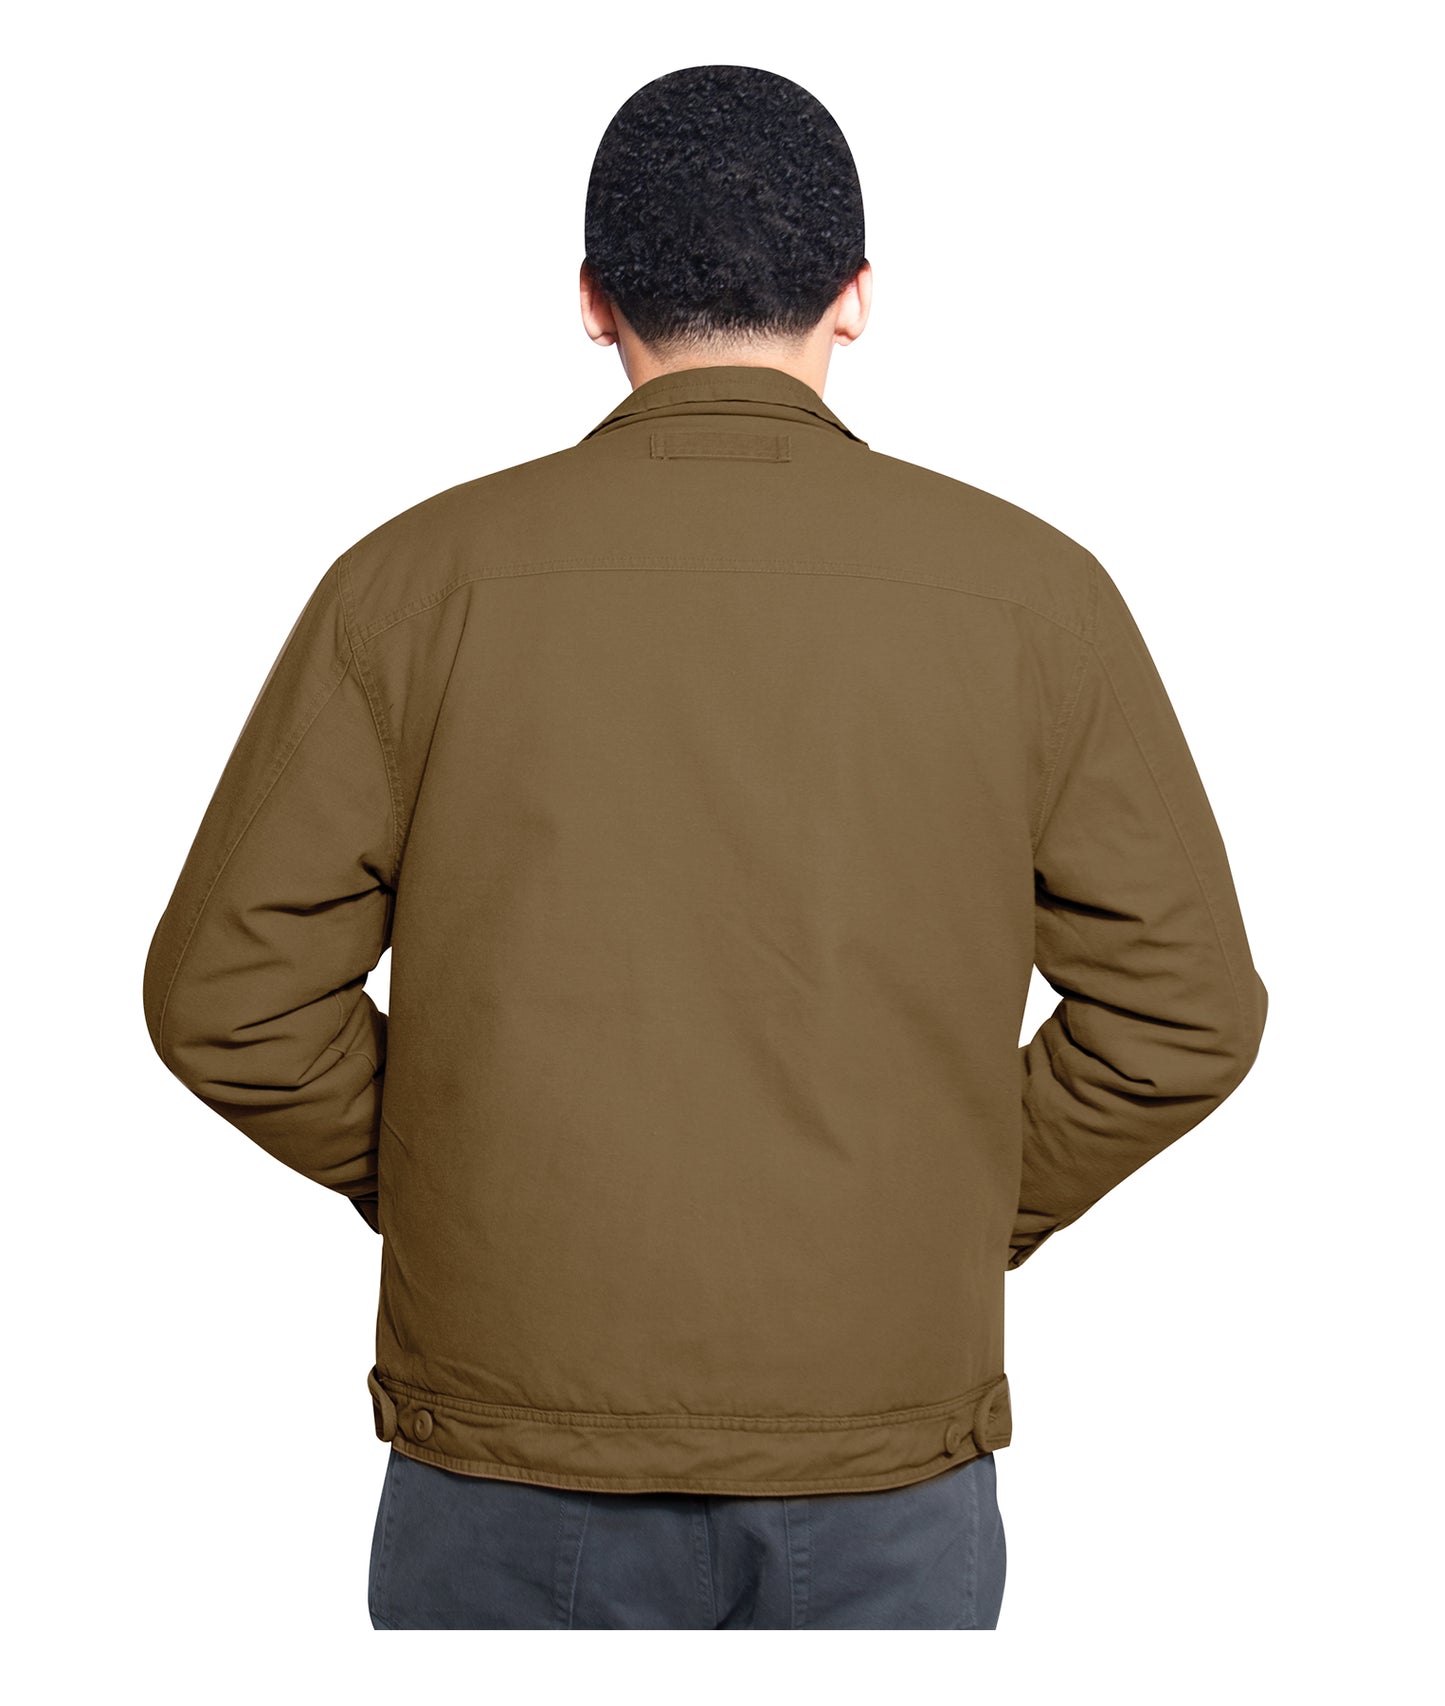 Rothco Concealed Carry 3 Season Jacket - Coyote Brown